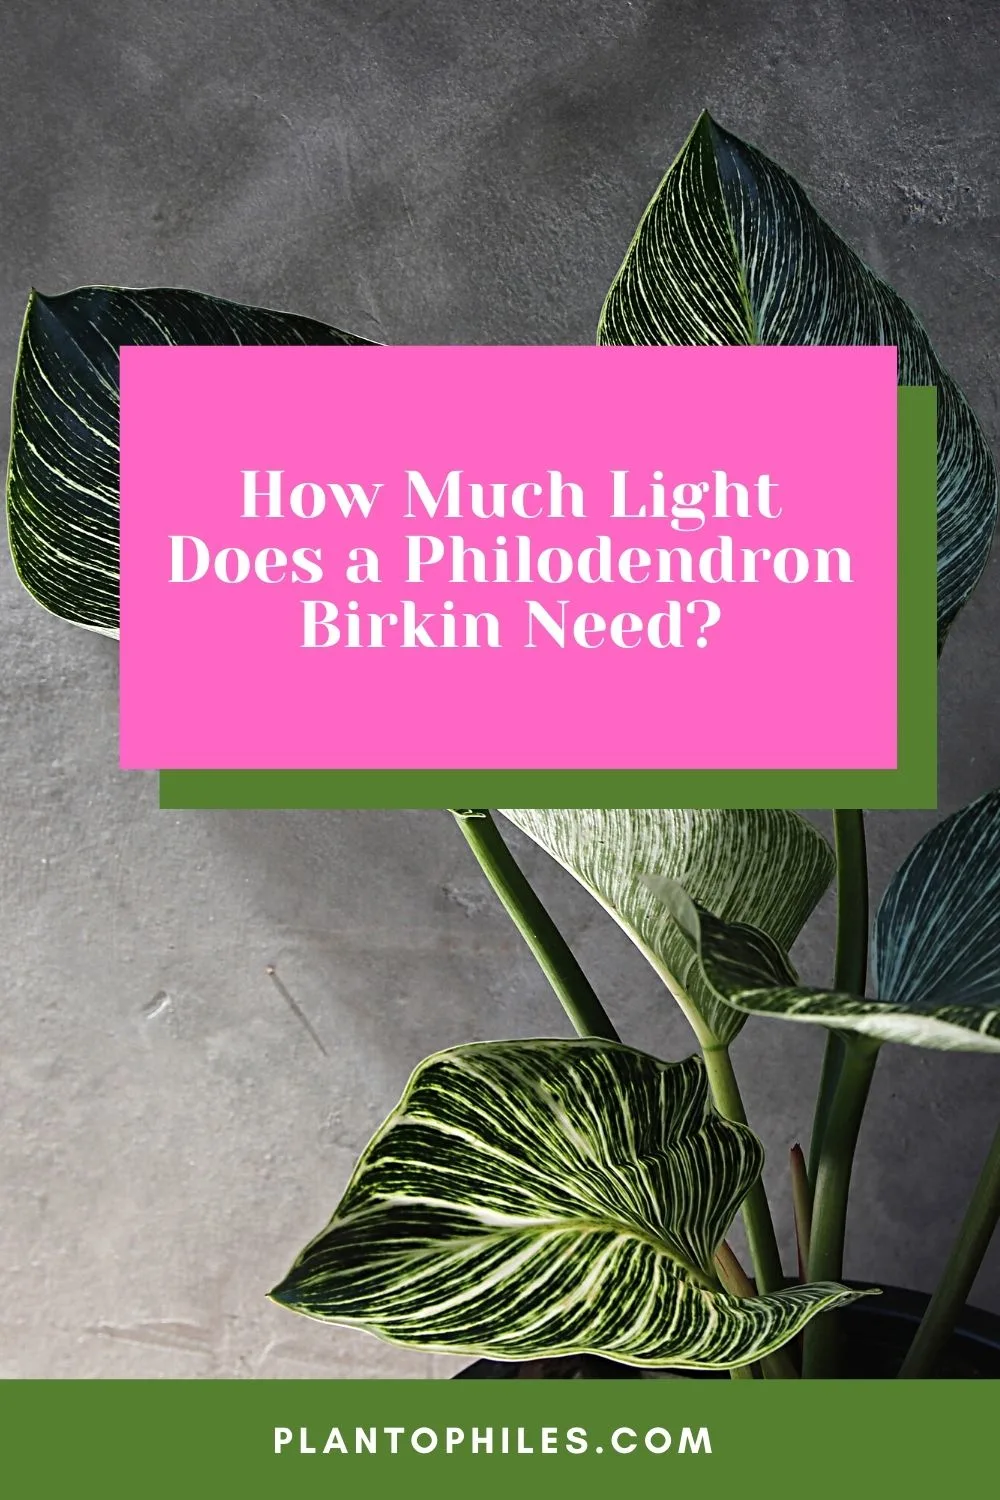 How Much Light Does a Philodendron Birkin Need